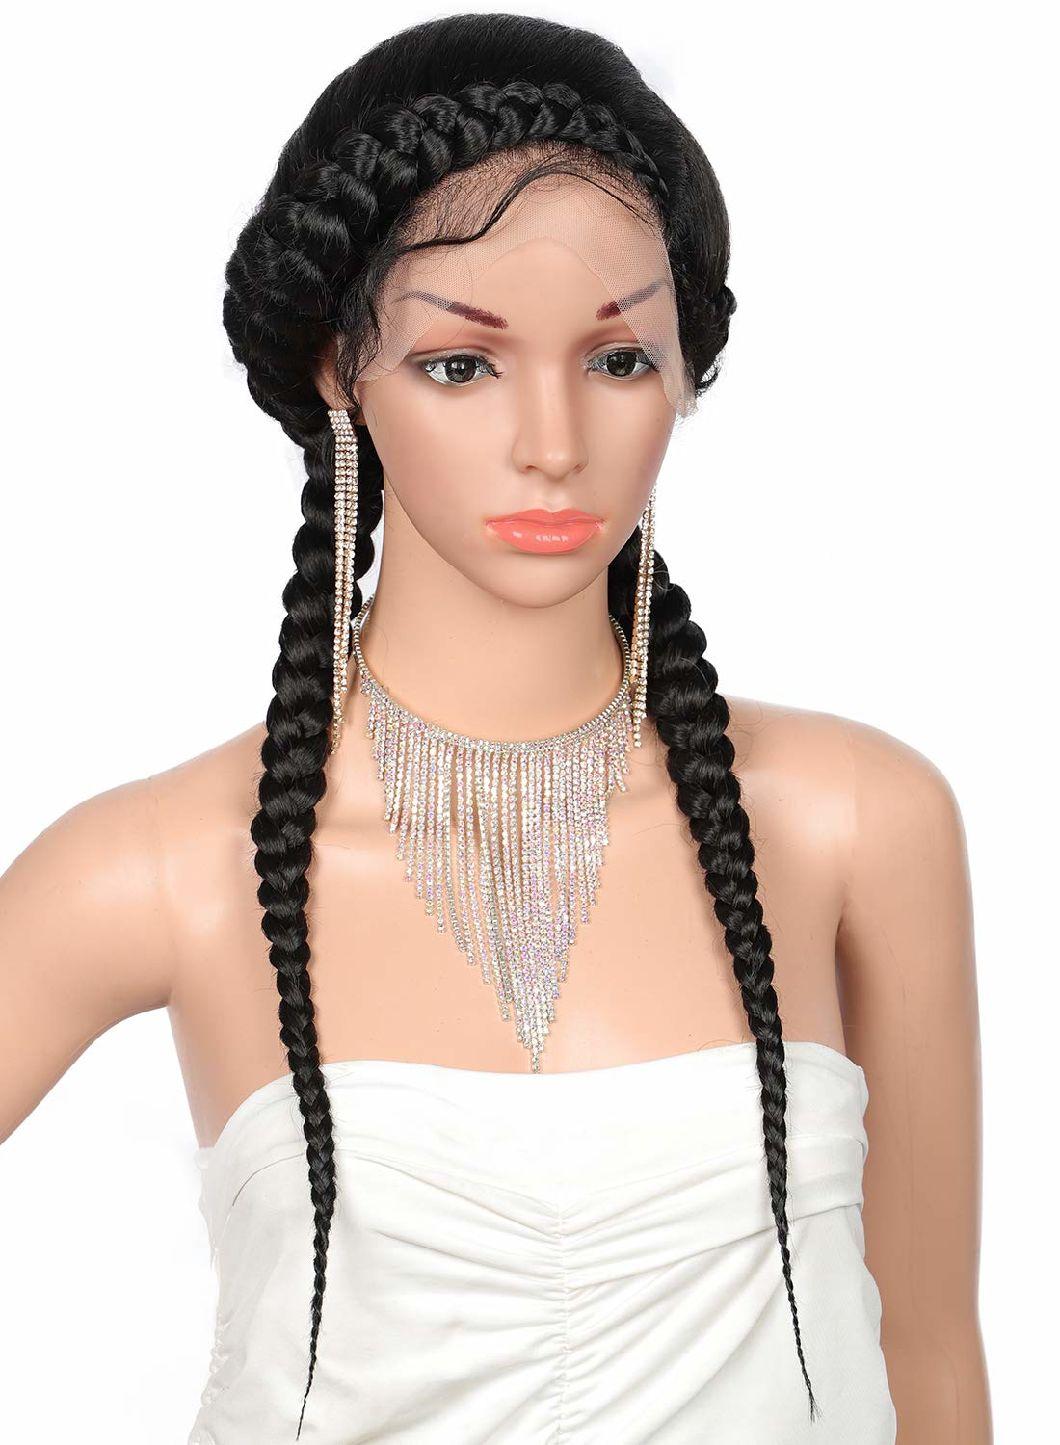 Fully Hand-Braided Swiss Lace Front Dutch Twins Braided Wigs with Baby Hair for Women Premium Synthetic